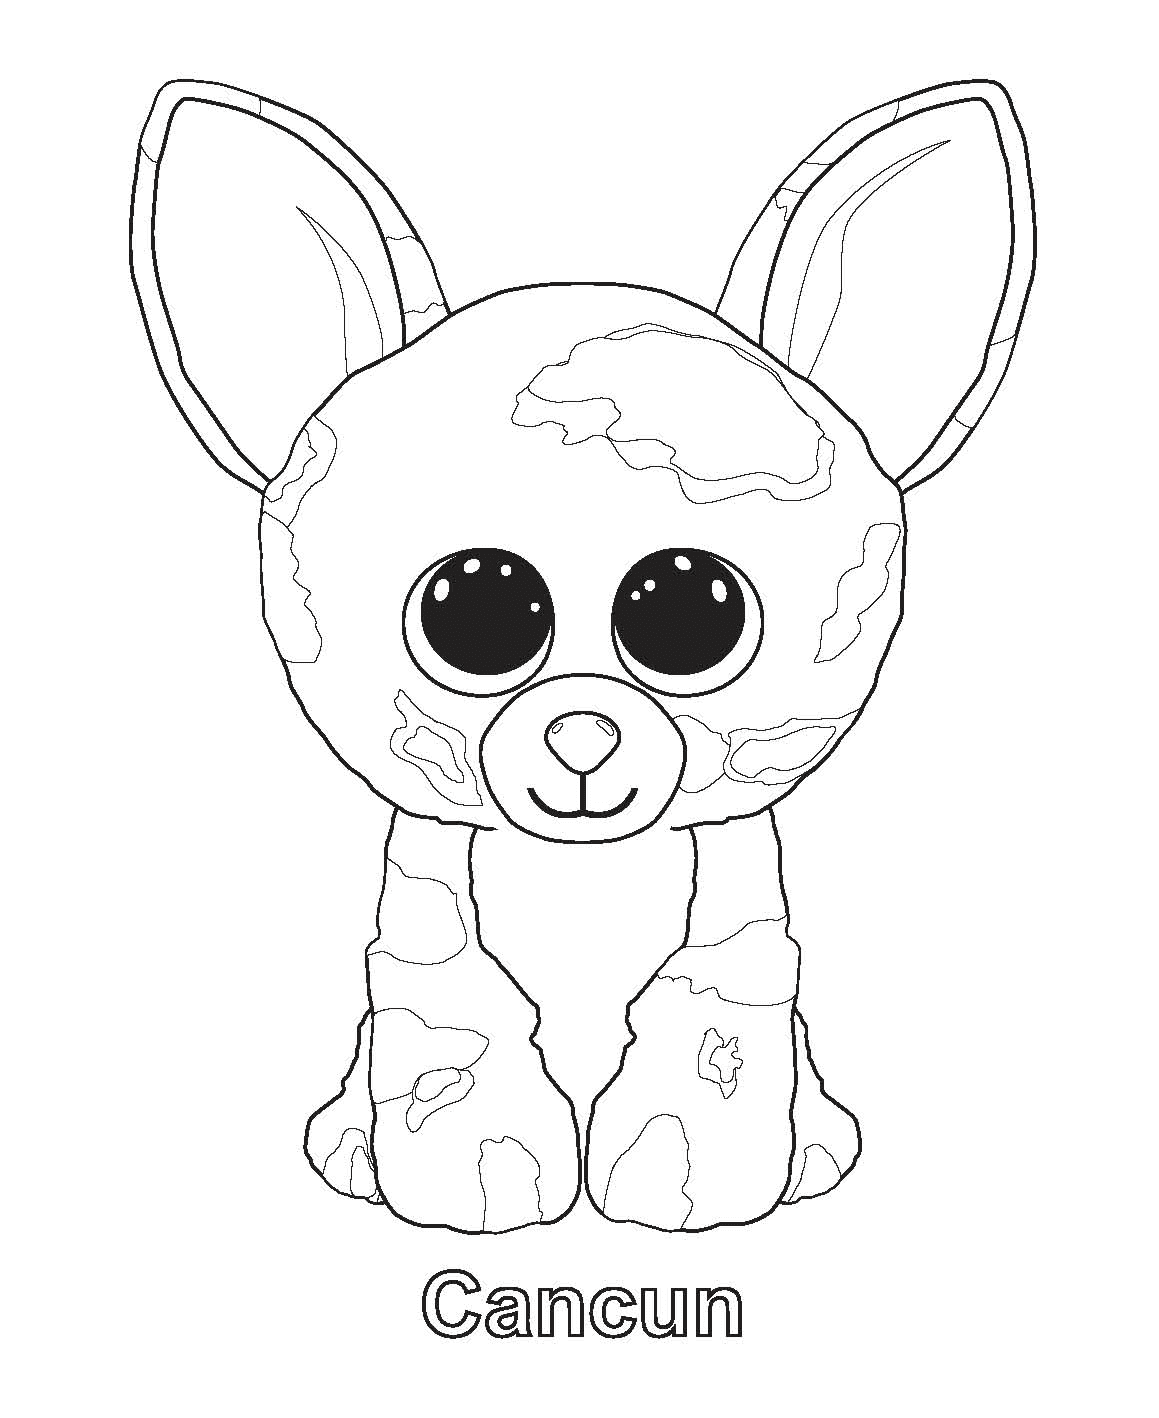 Cancun Beanie Boos Coloring Pages